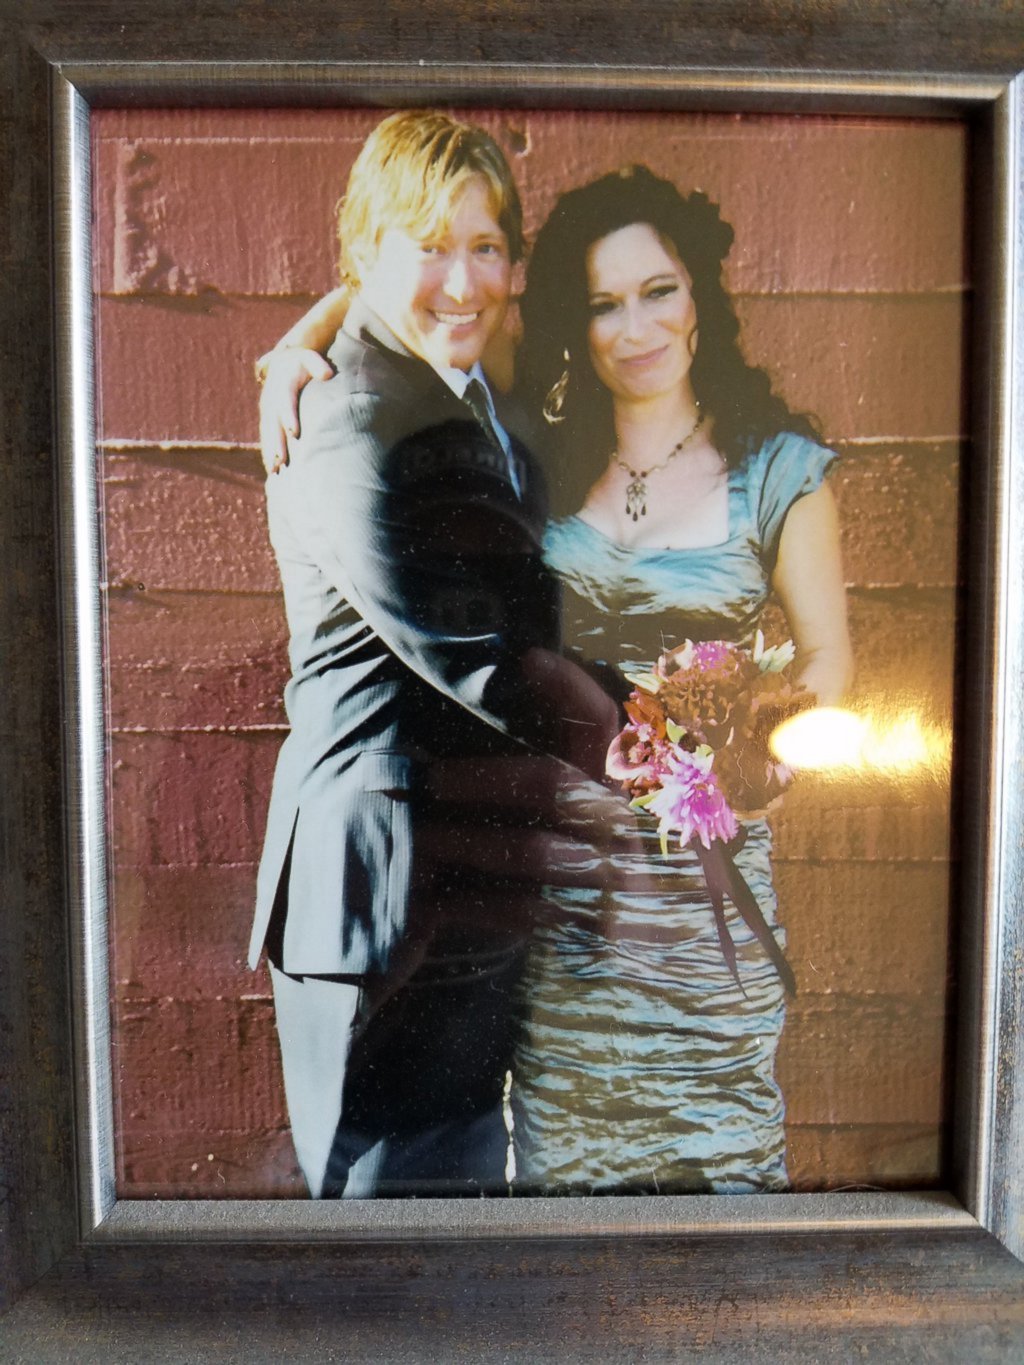 PHOTO: The Snohomish County Sheriff released this image of Patrick Shunn and Monique Patenaude on April 13, 2016 with a notice that the Arlington, Washington couple hadn't been seen since April 11.